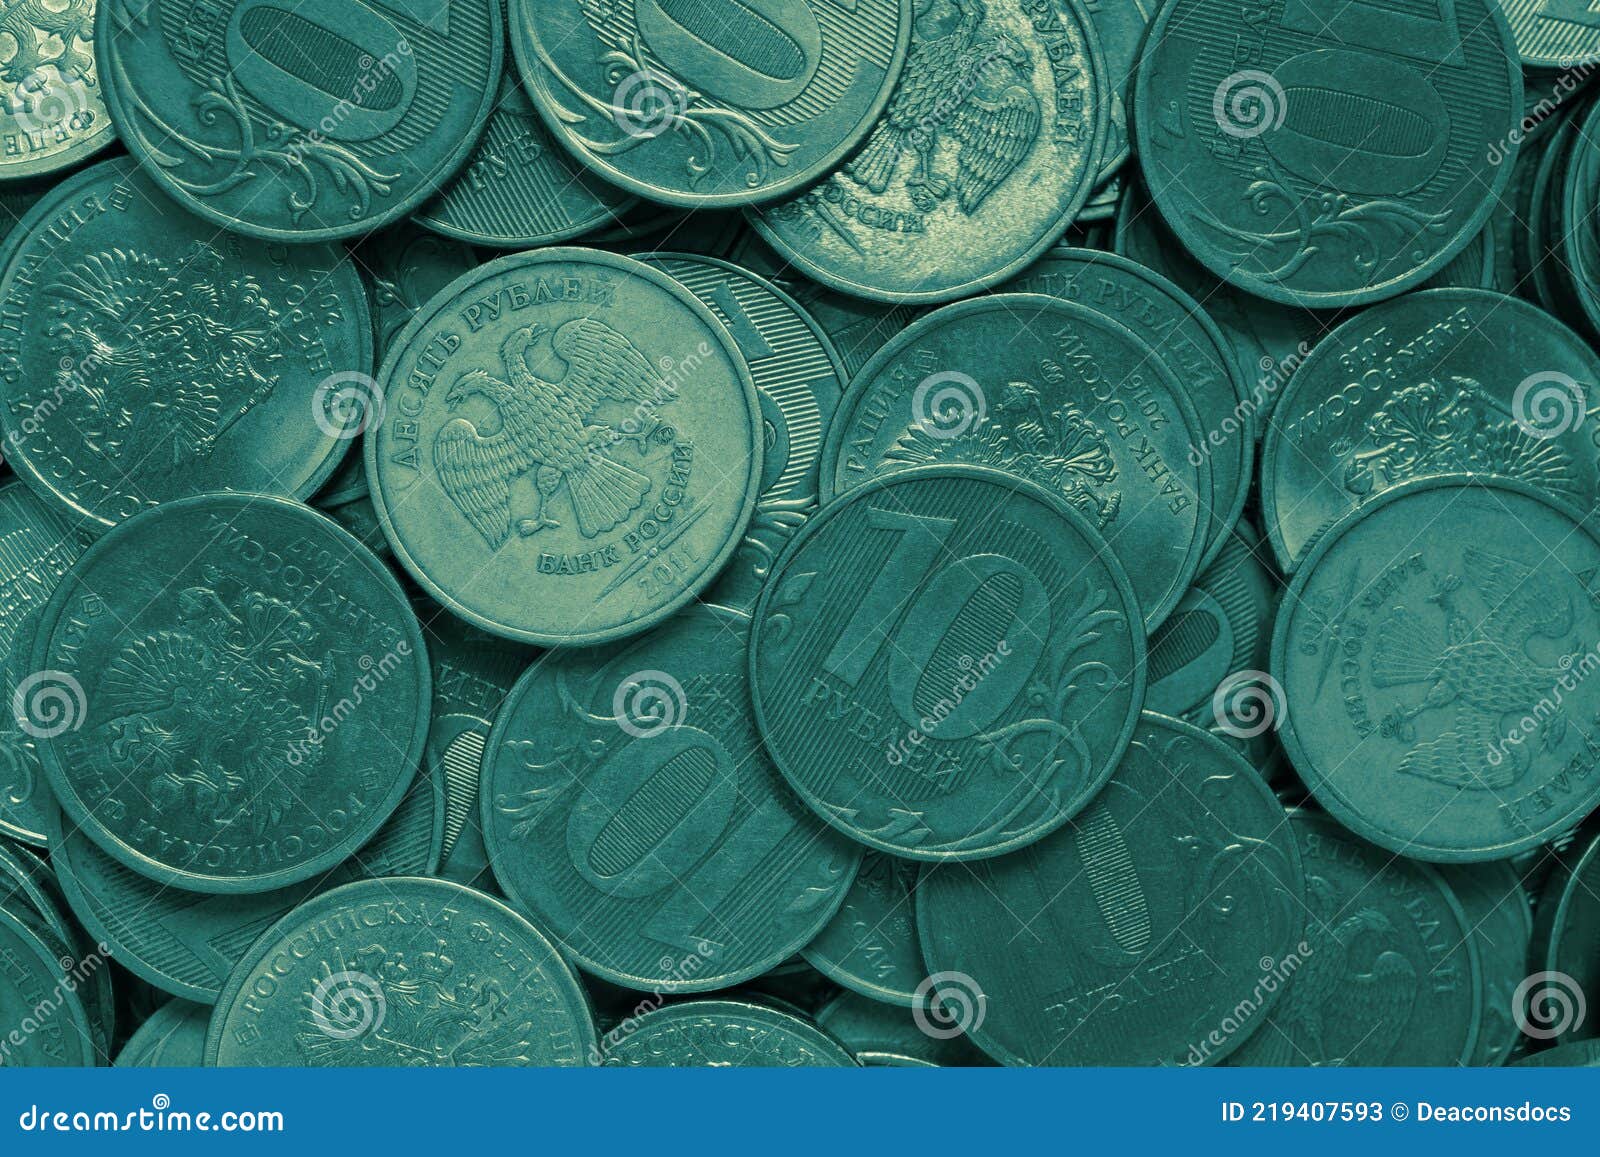 Surface of Many Russian Coins of 10 Ten Rubles. Dark Green Tinted  Background. Money Wallpaper Stock Image - Image of coins, russian: 219407593